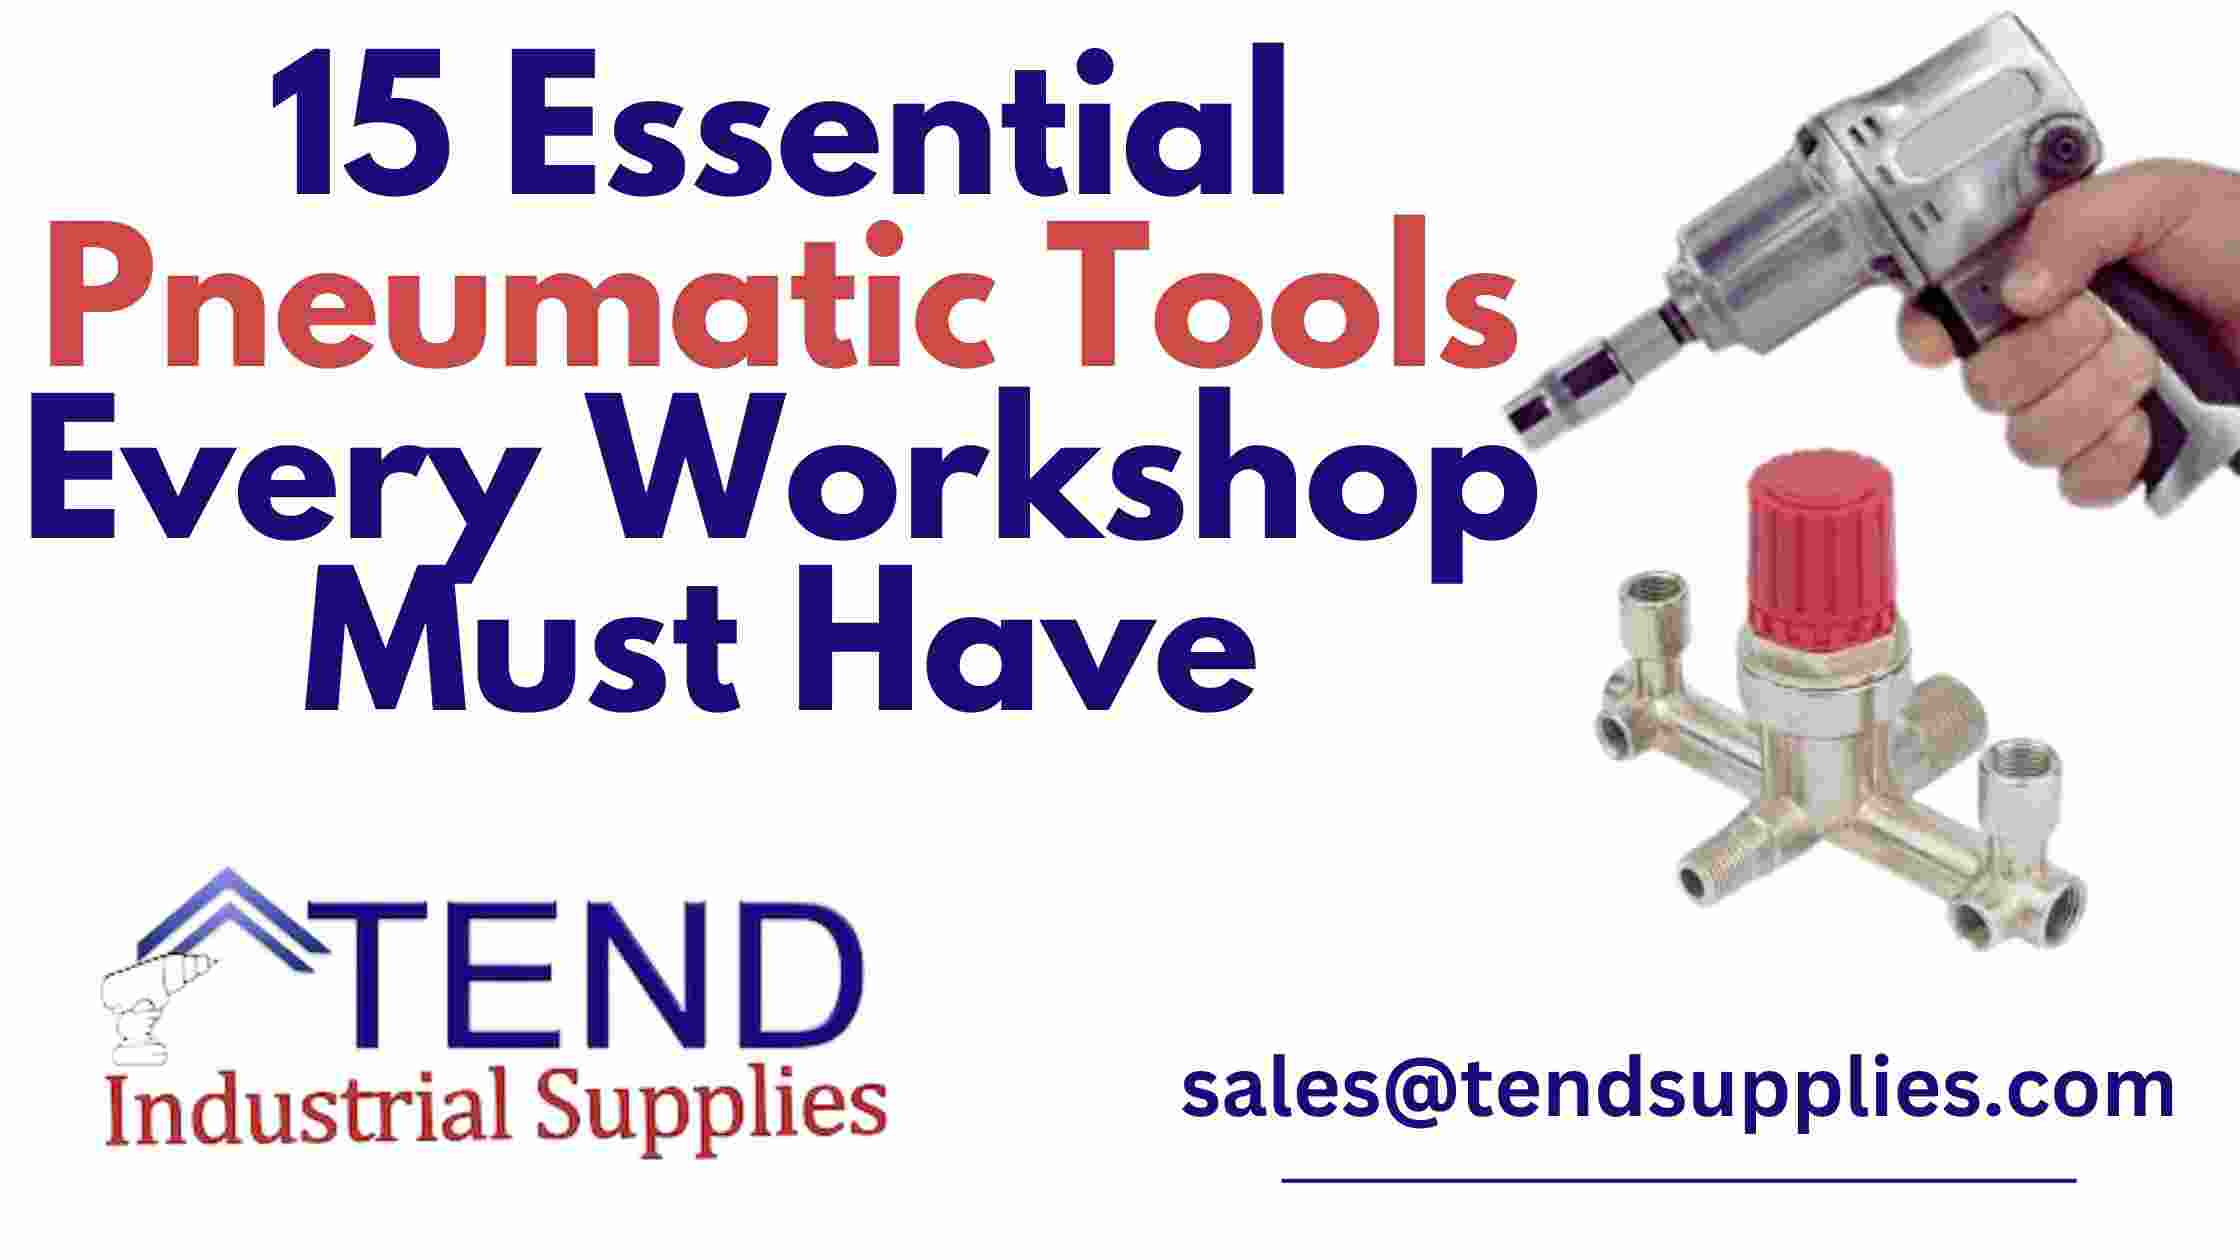 15 Essential Pneumatic Tools Every Workshop Must Have - Tend Industrial  Supplies